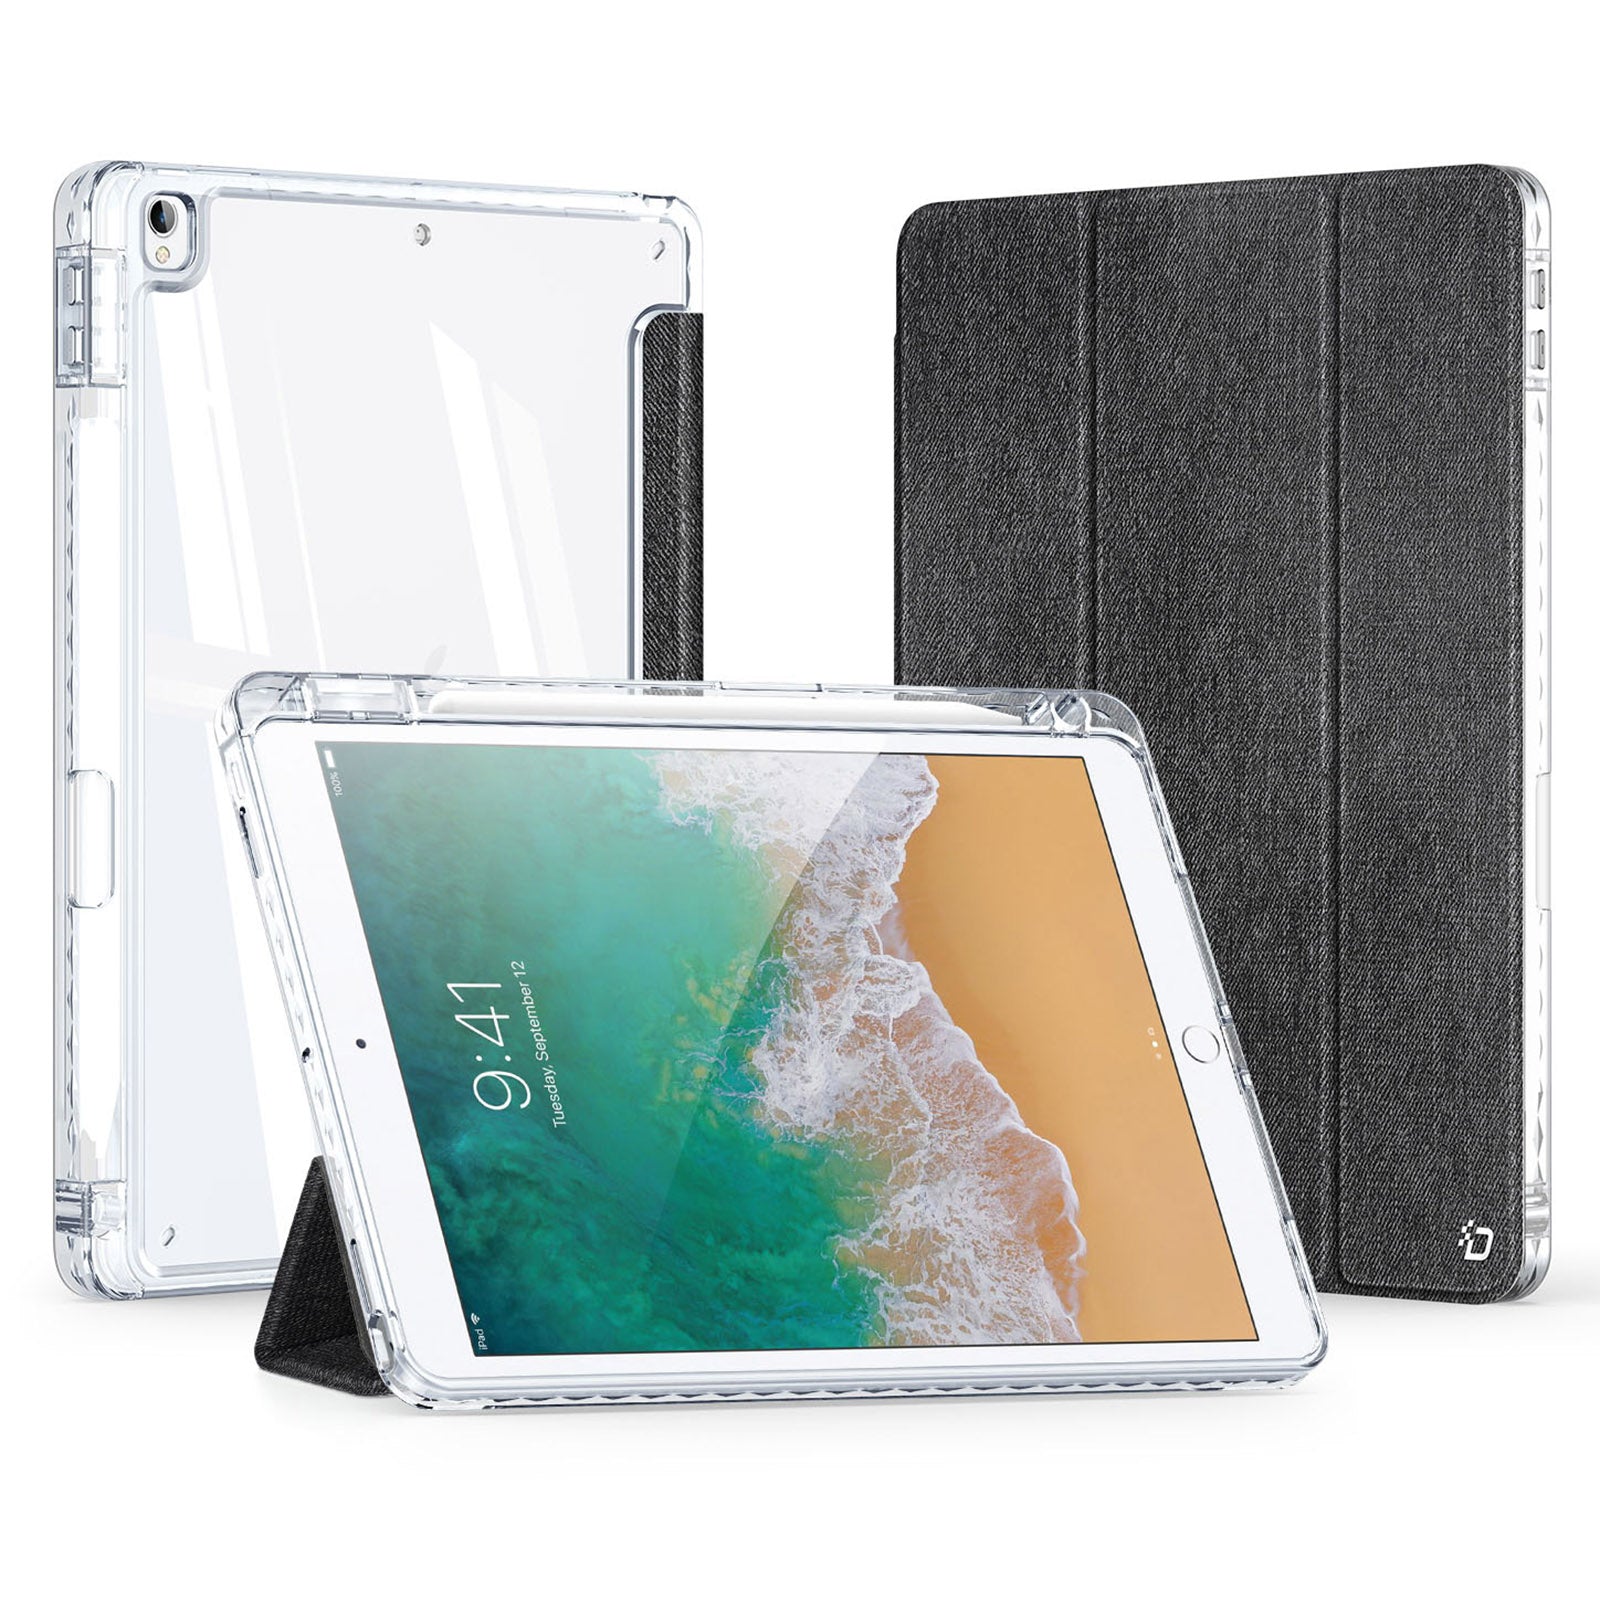 DUX DUCIS Unid Series For iPad 10.2 (2021) / (2020) / (2019) / iPad Air 10.5 inch (2019) / Pro 10.5-inch (2017) Leather Case Clear Back Cover - Black